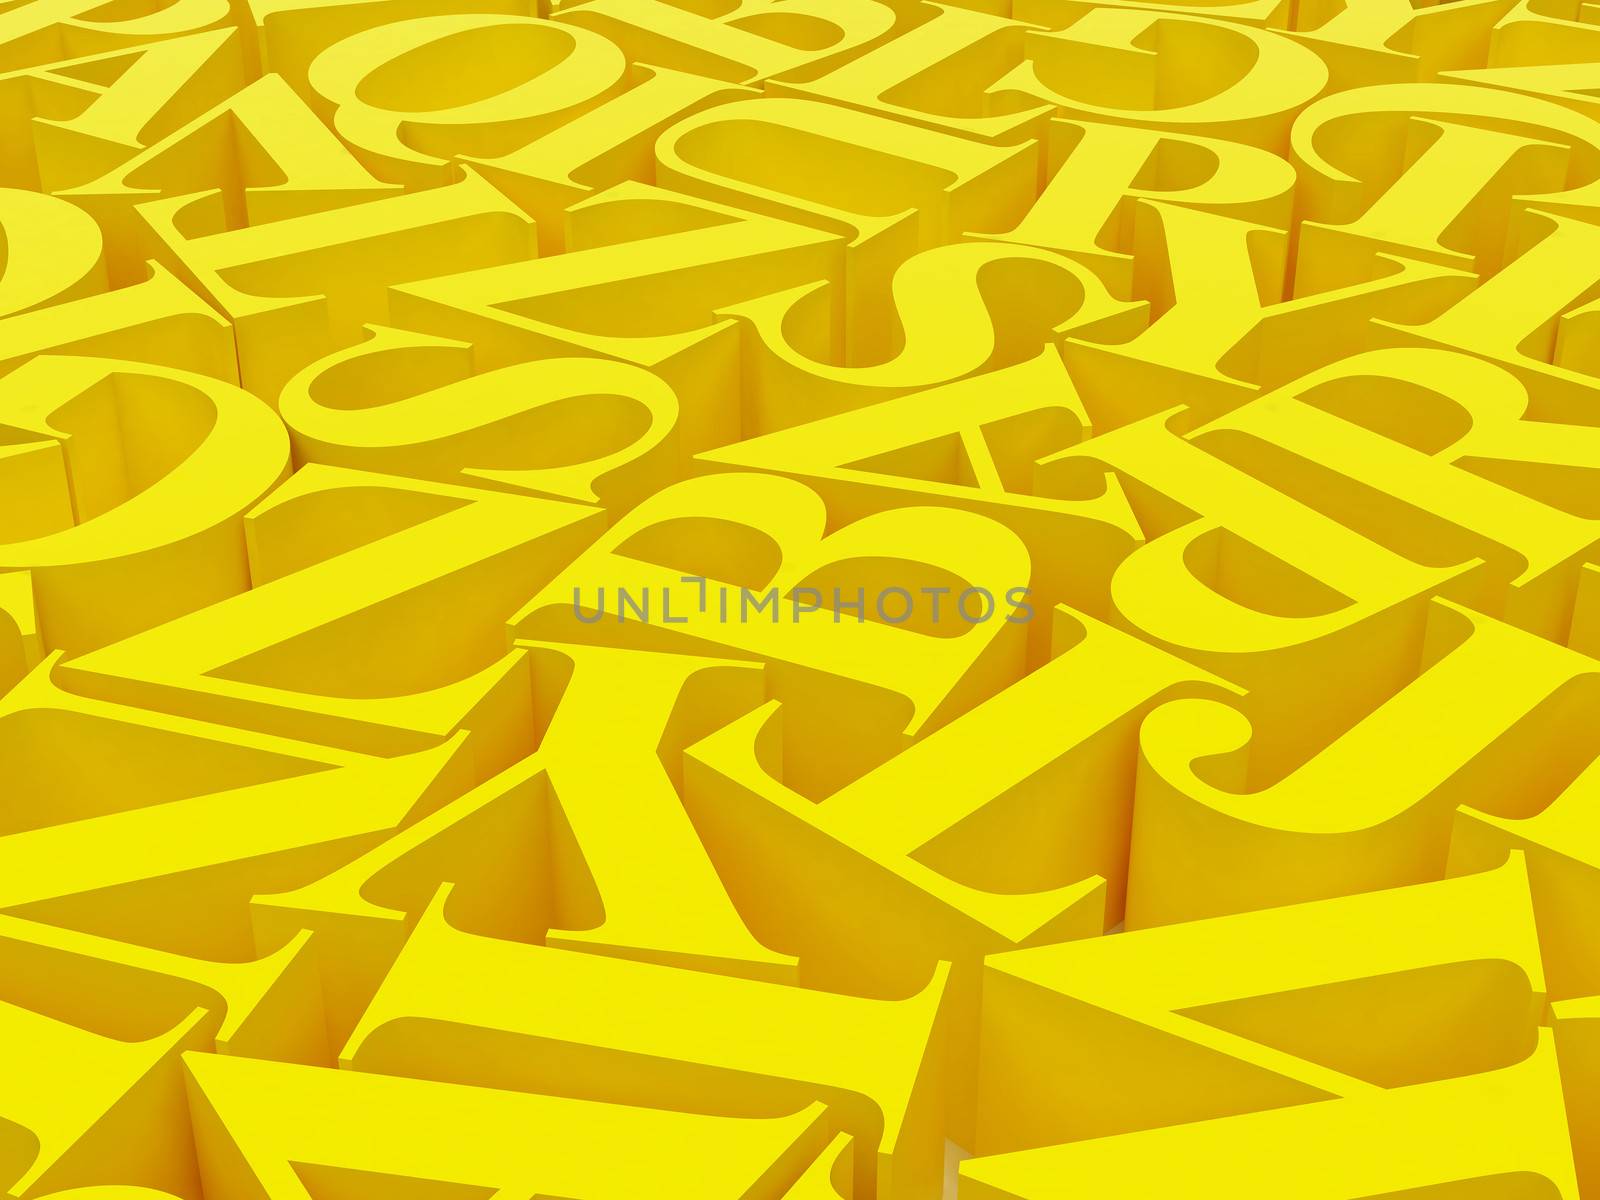 Background of alphabets by rook